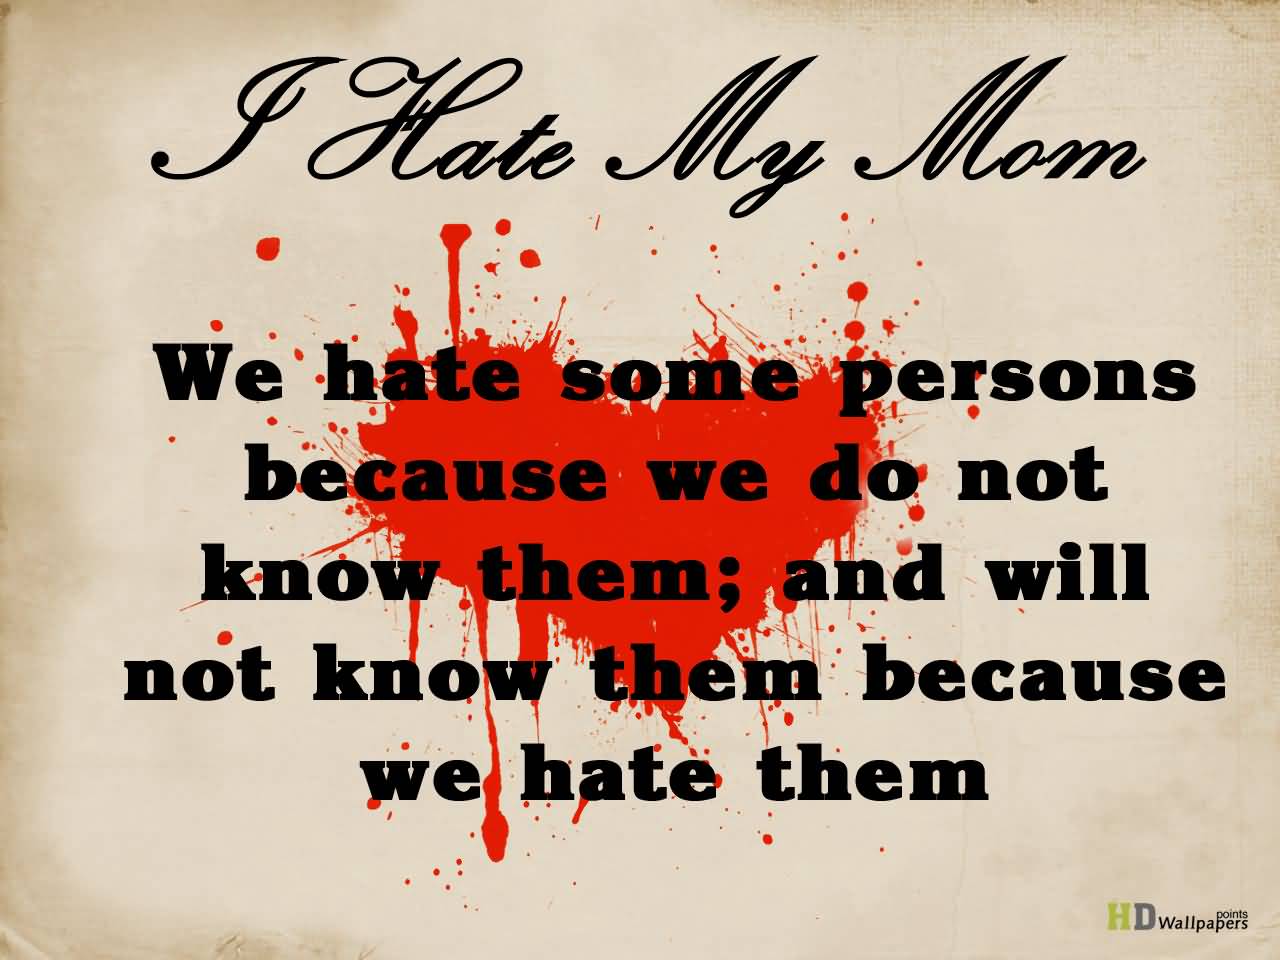 We hate some persons because we do not know them; and we will not know them because we hate them.